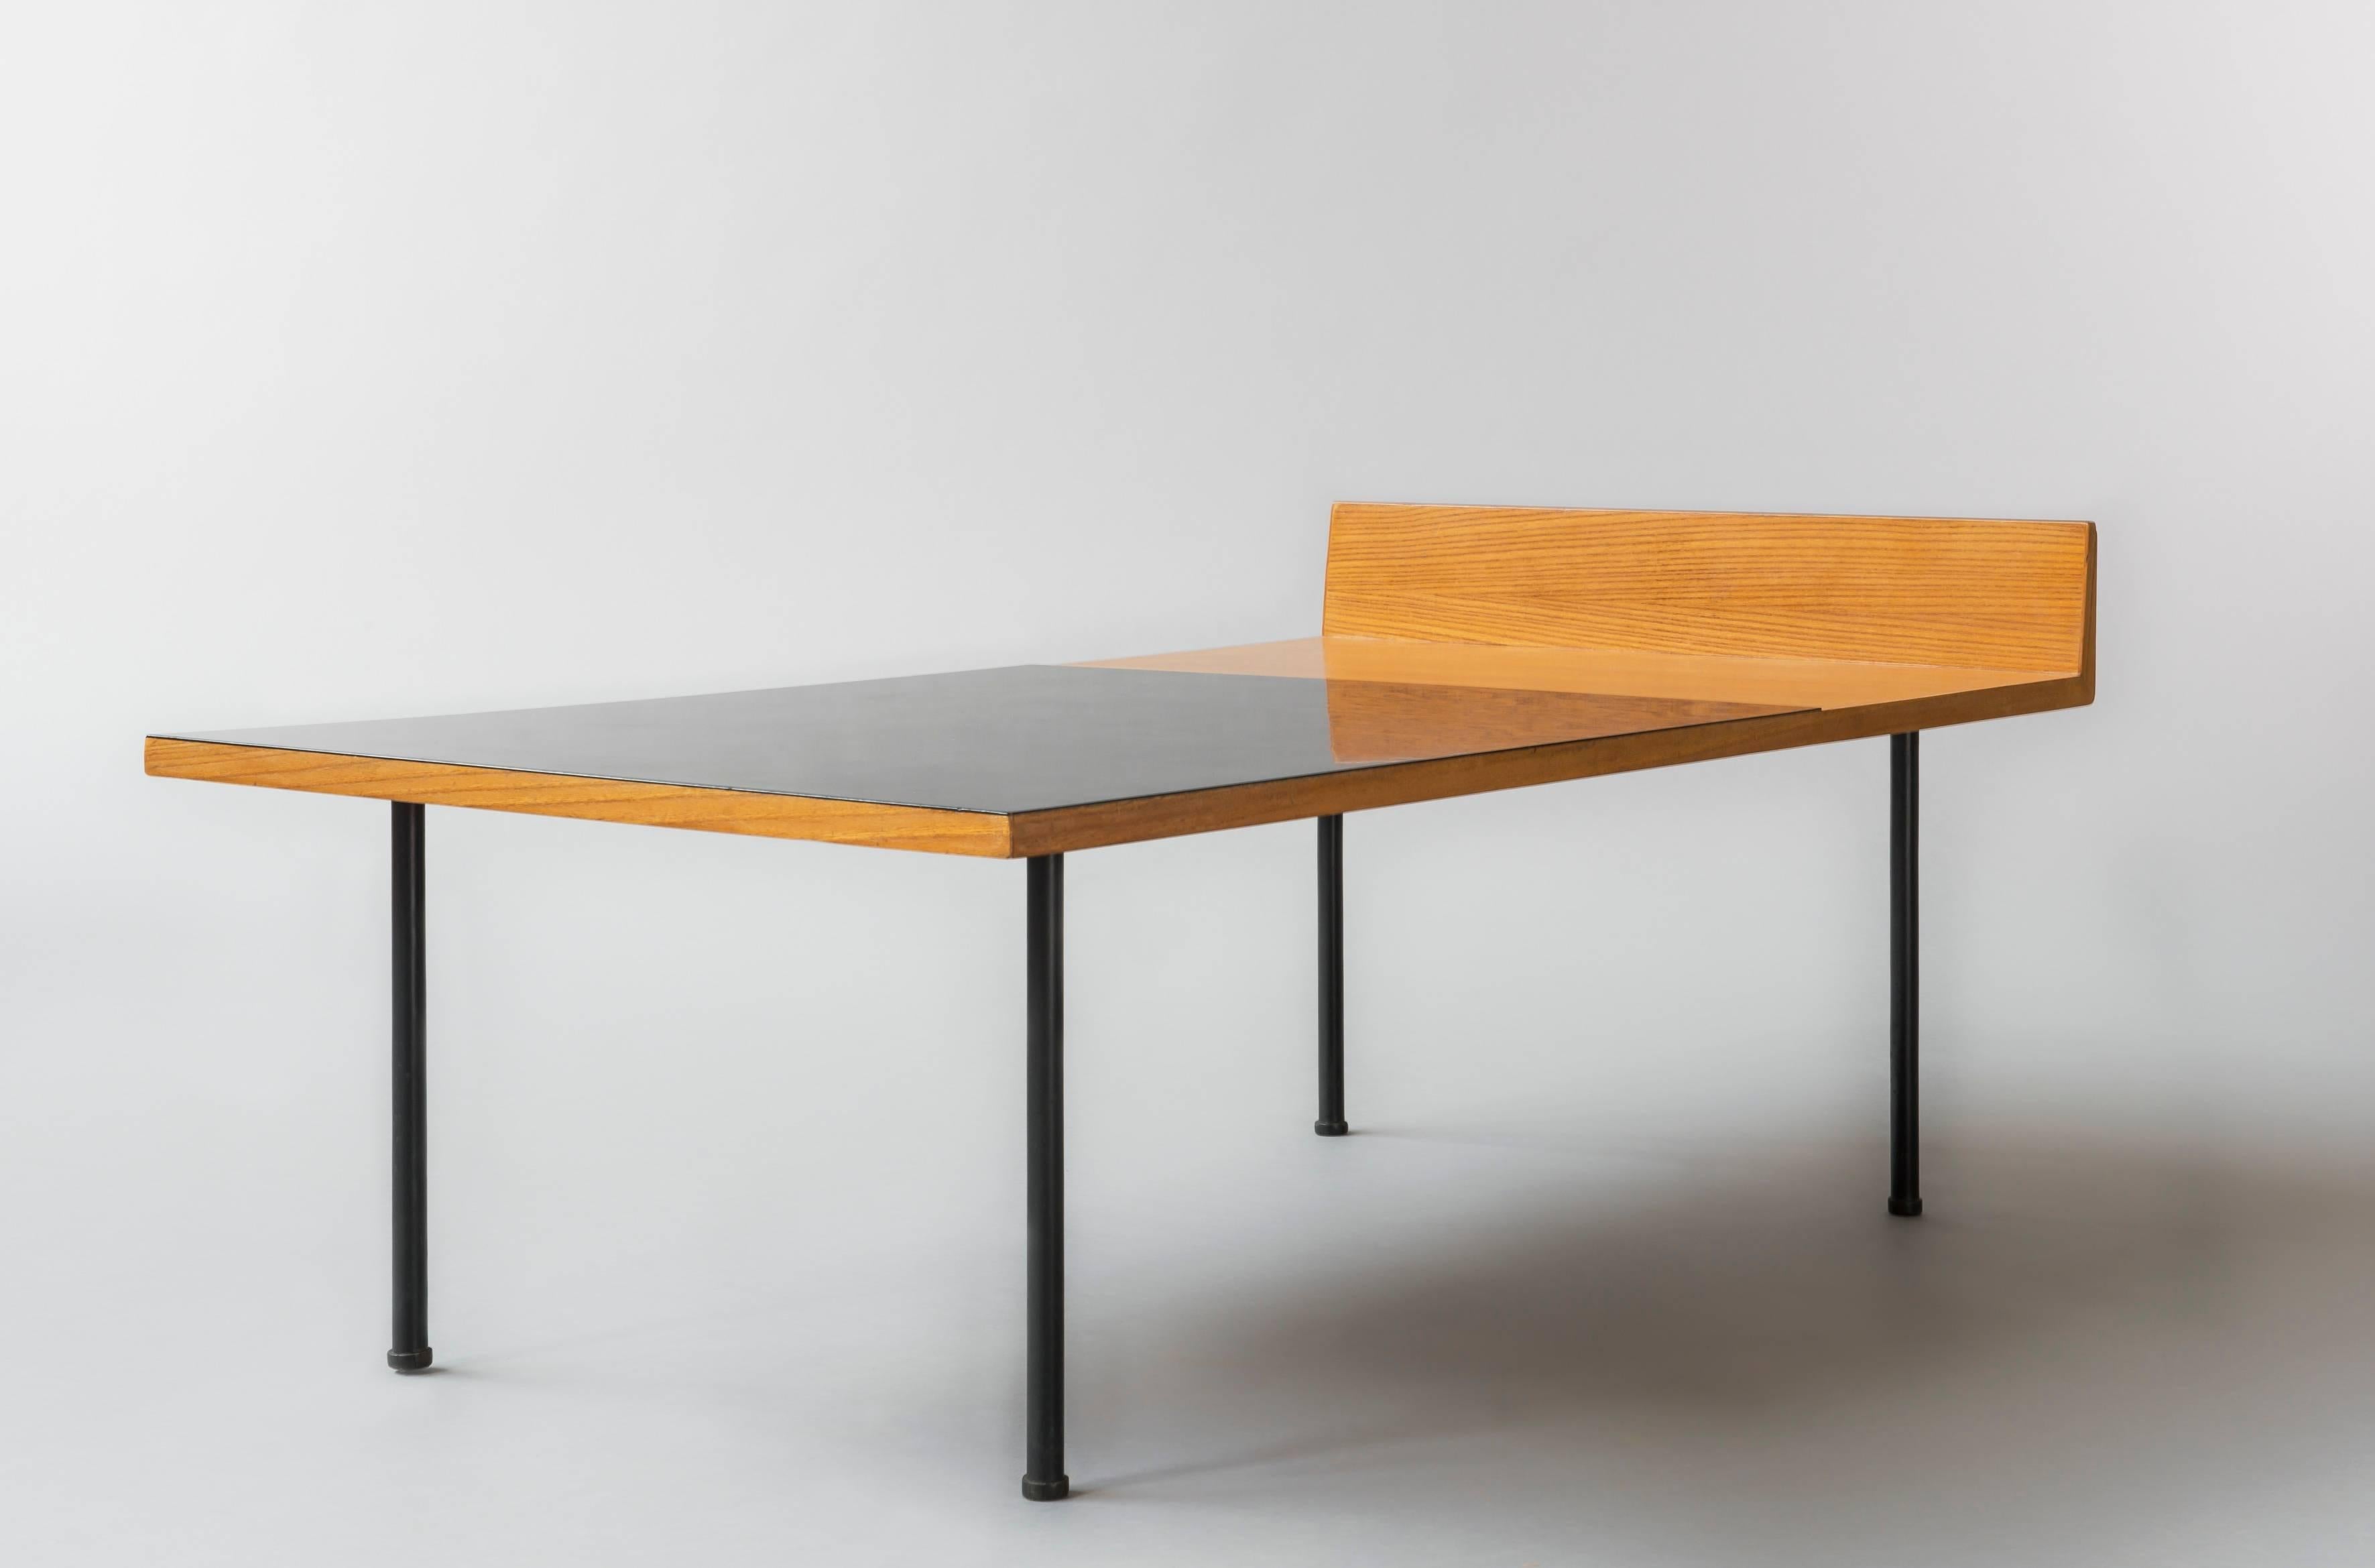 Low table 132 by André Monpoix (1925-1976)
Meubles TV edition, 1953